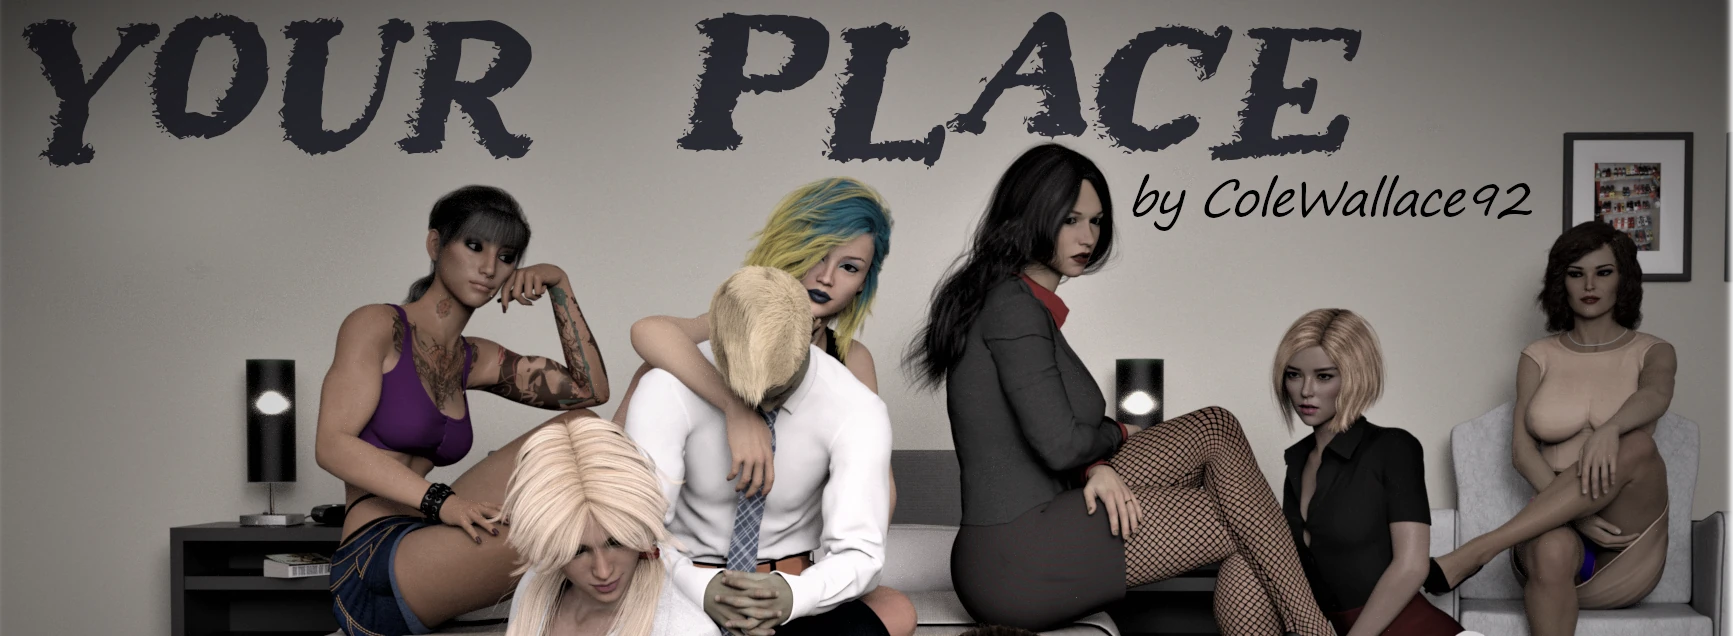 your place game banner